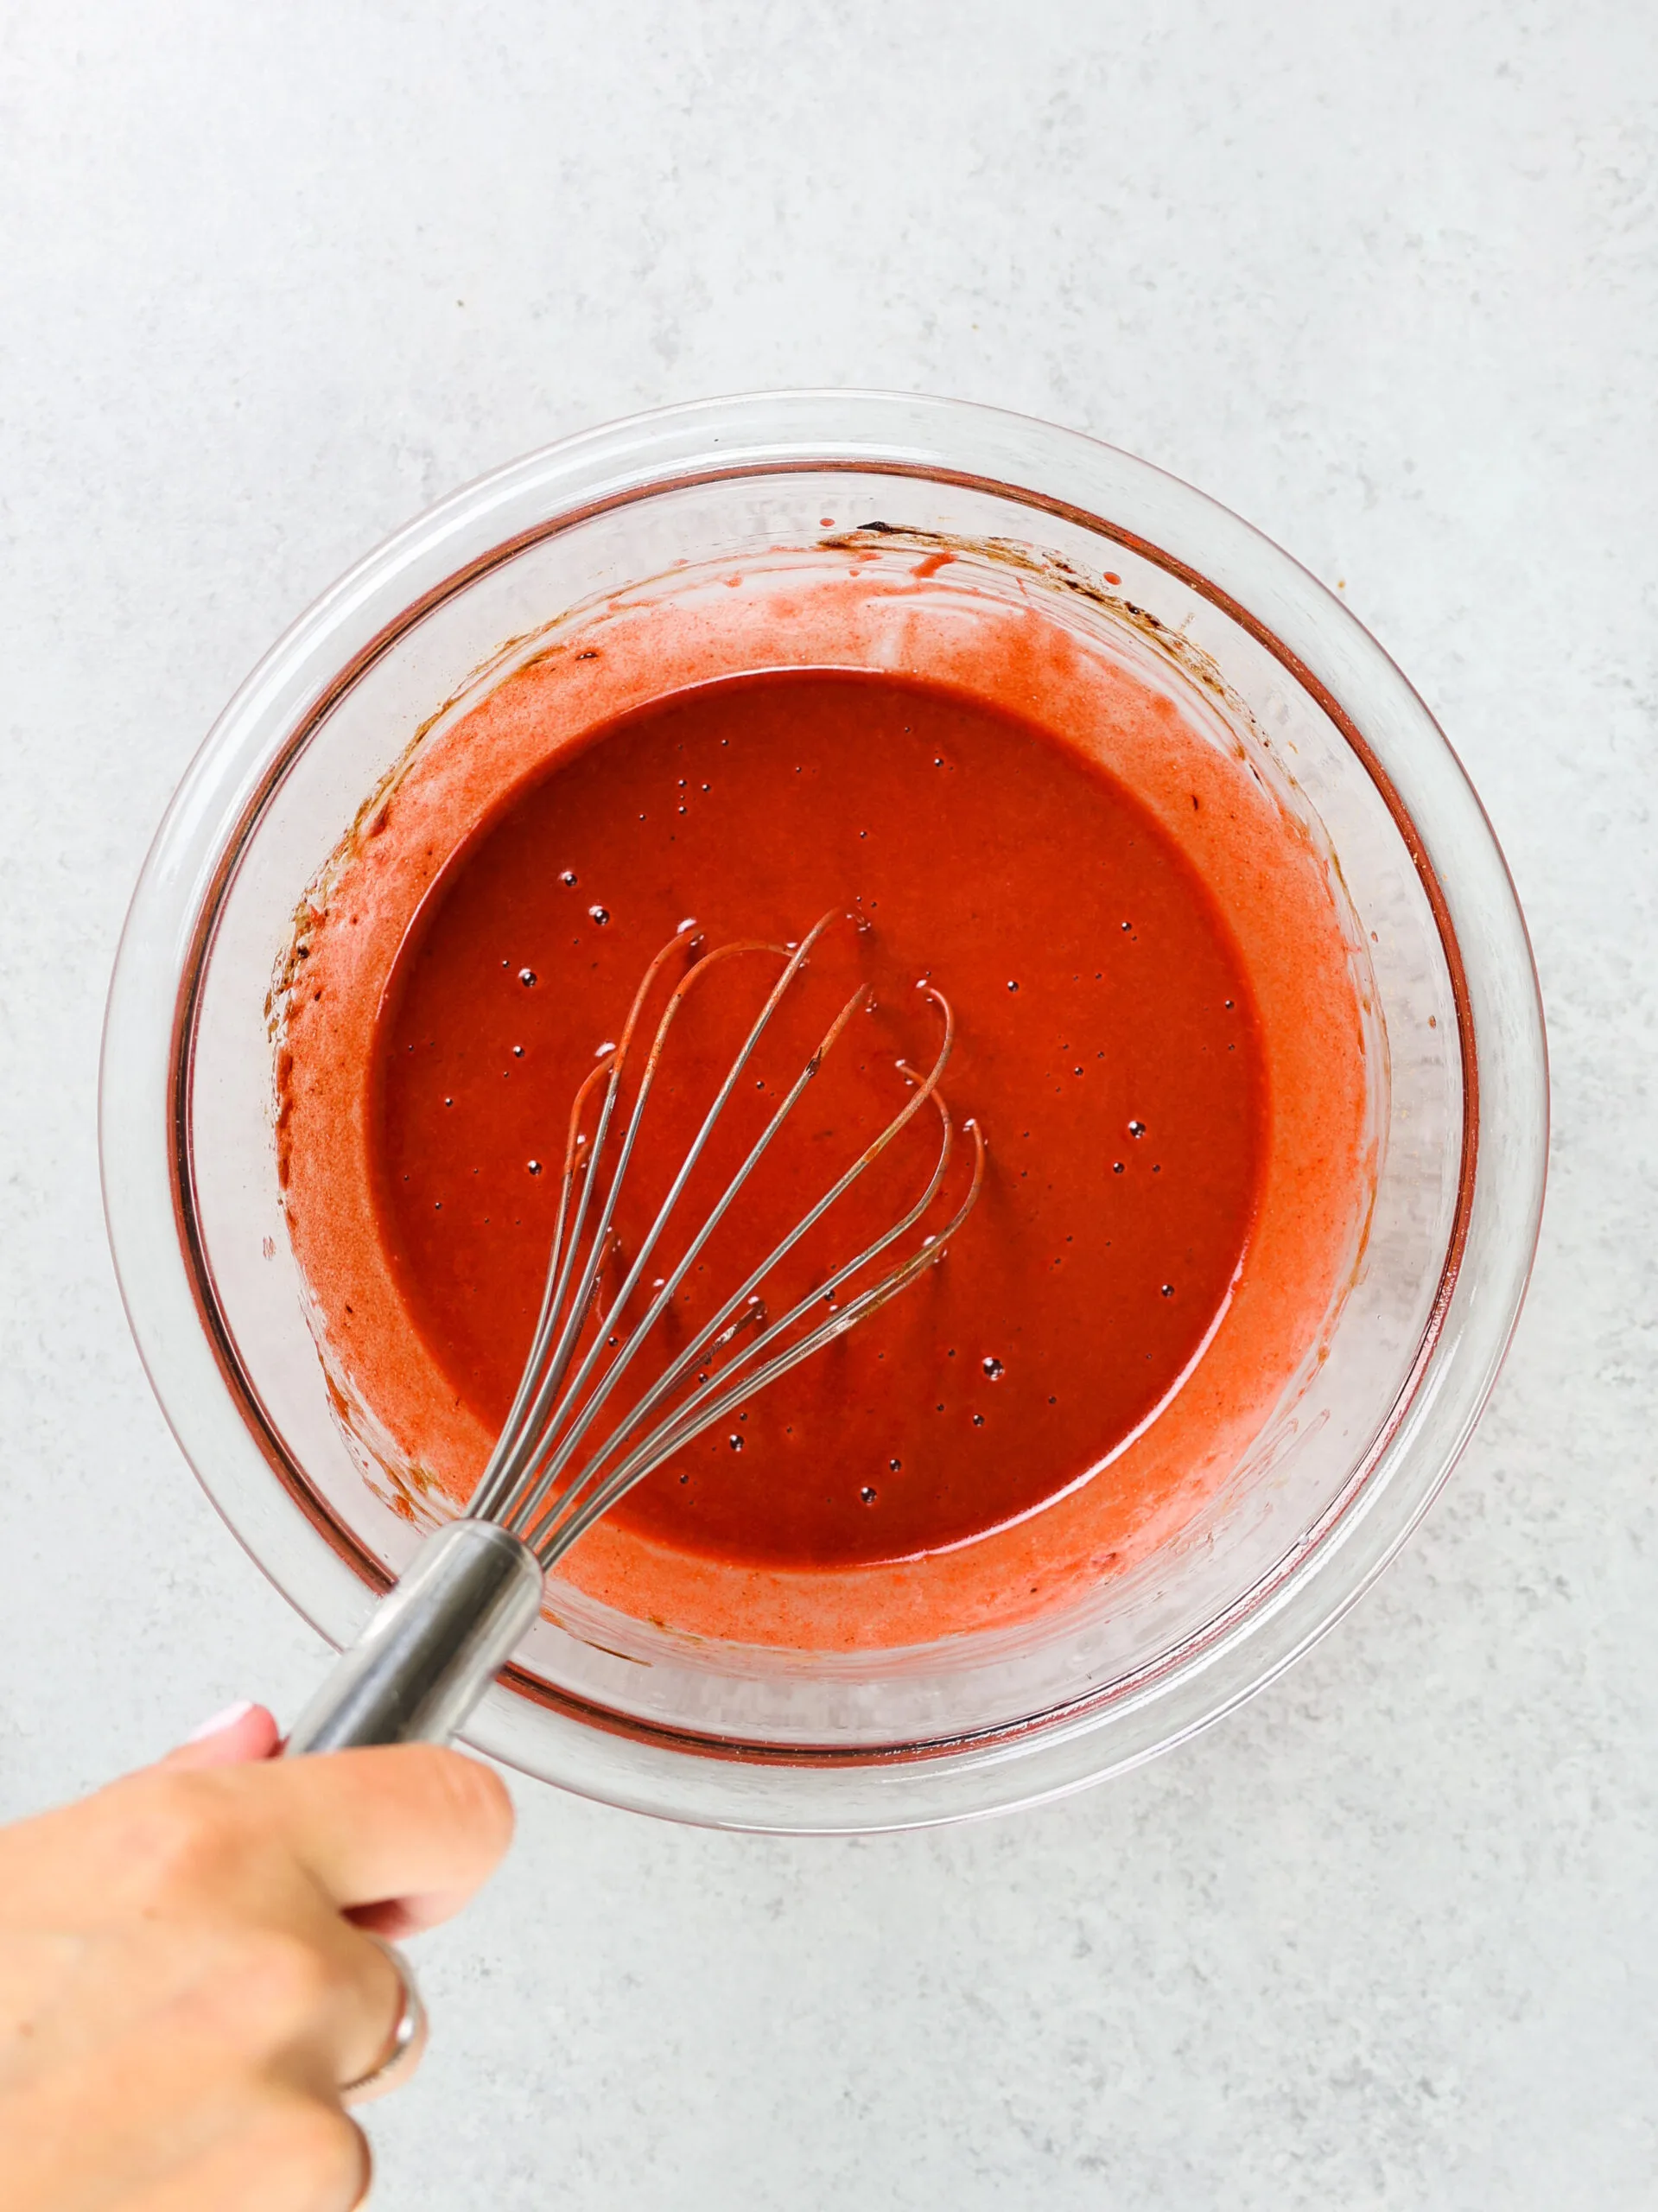 image of red velvet muffin batter being made with red gel food coloring